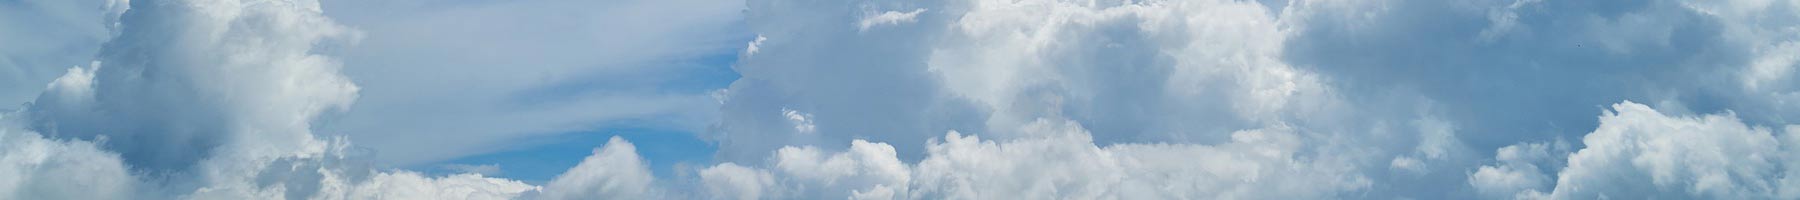 blue sky with white puffy clouds background texture